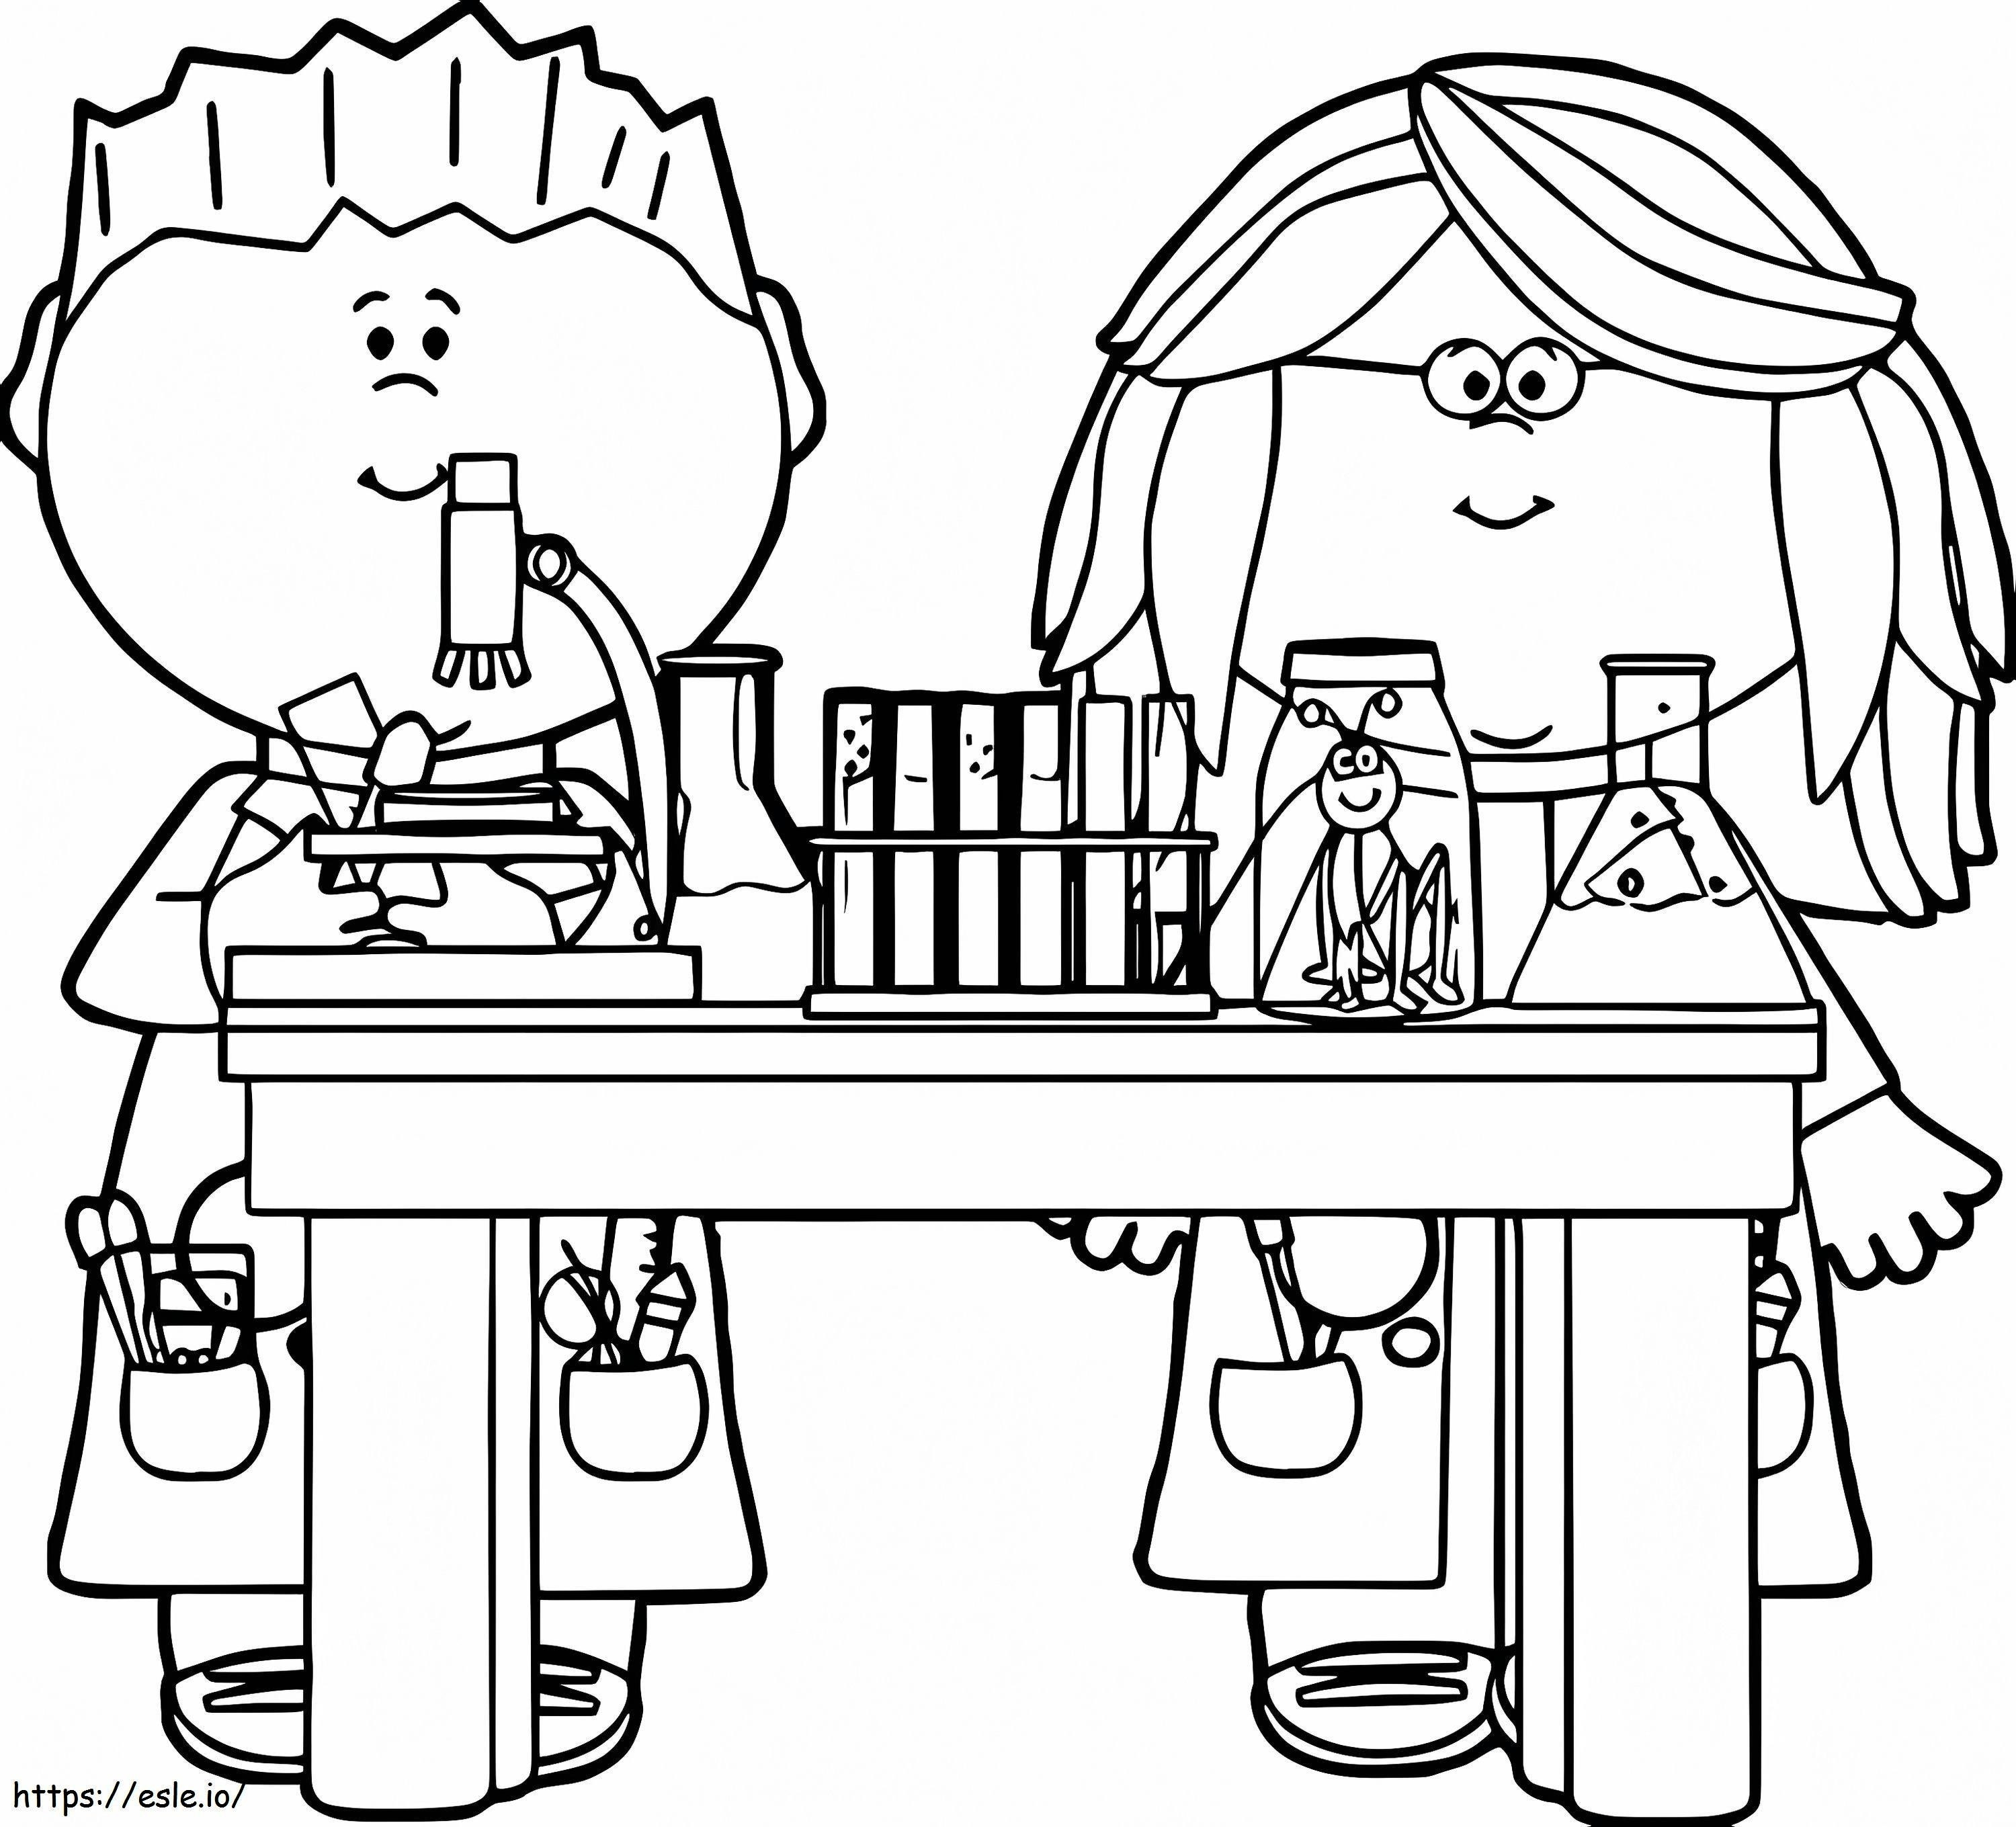 Science Kids coloring page